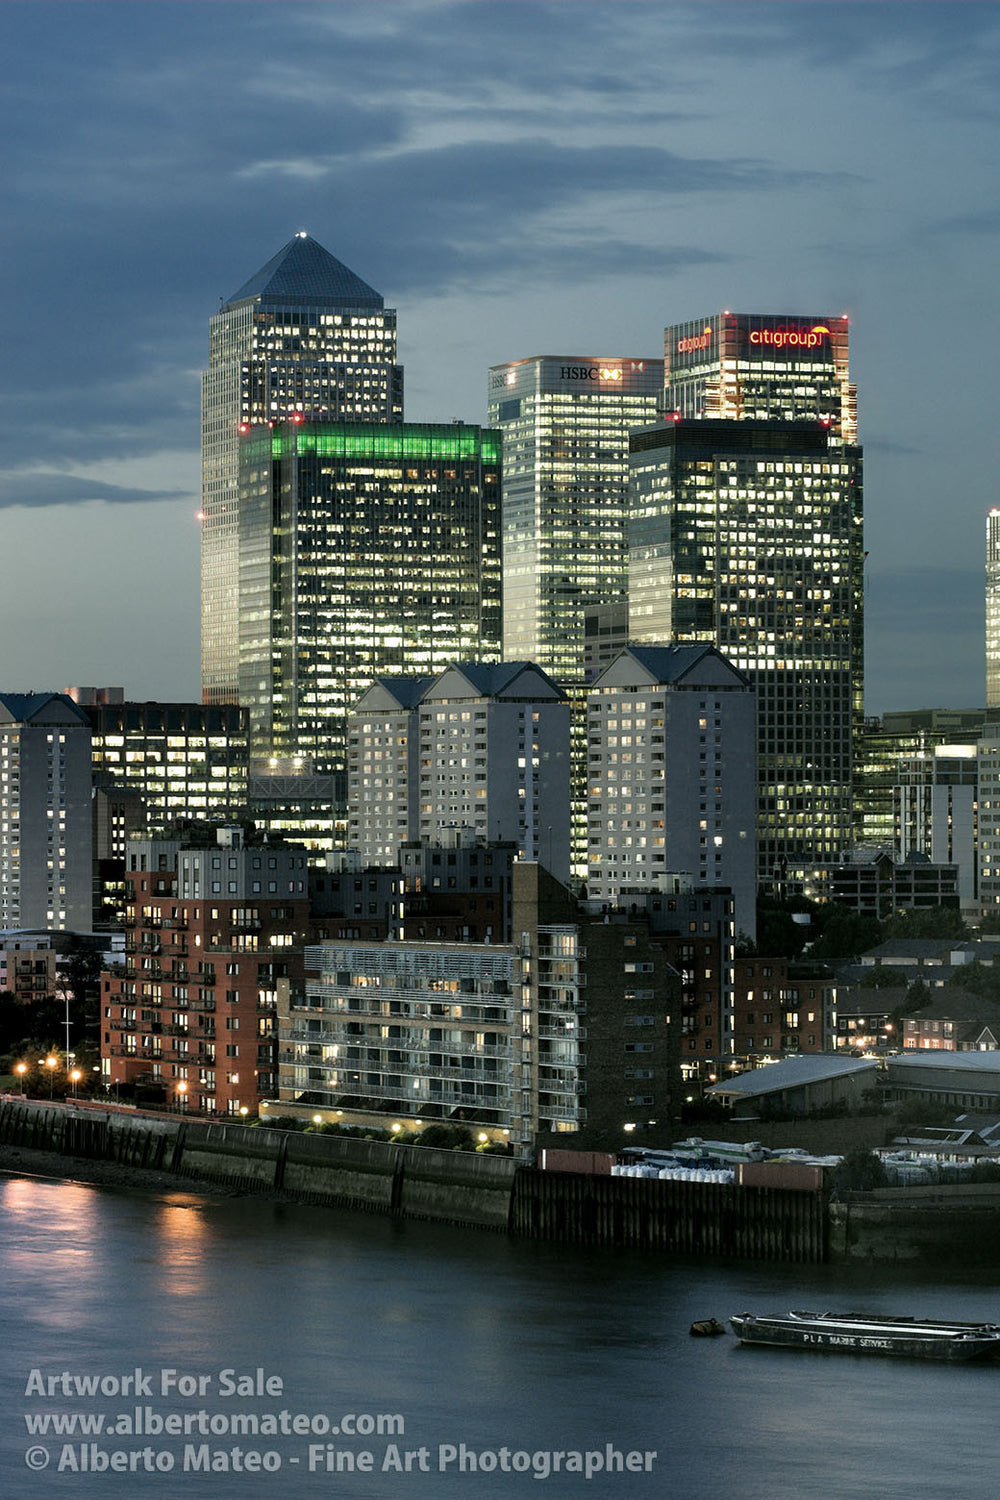 Canary Wharf at dusk, Thames River, London. | Full view.